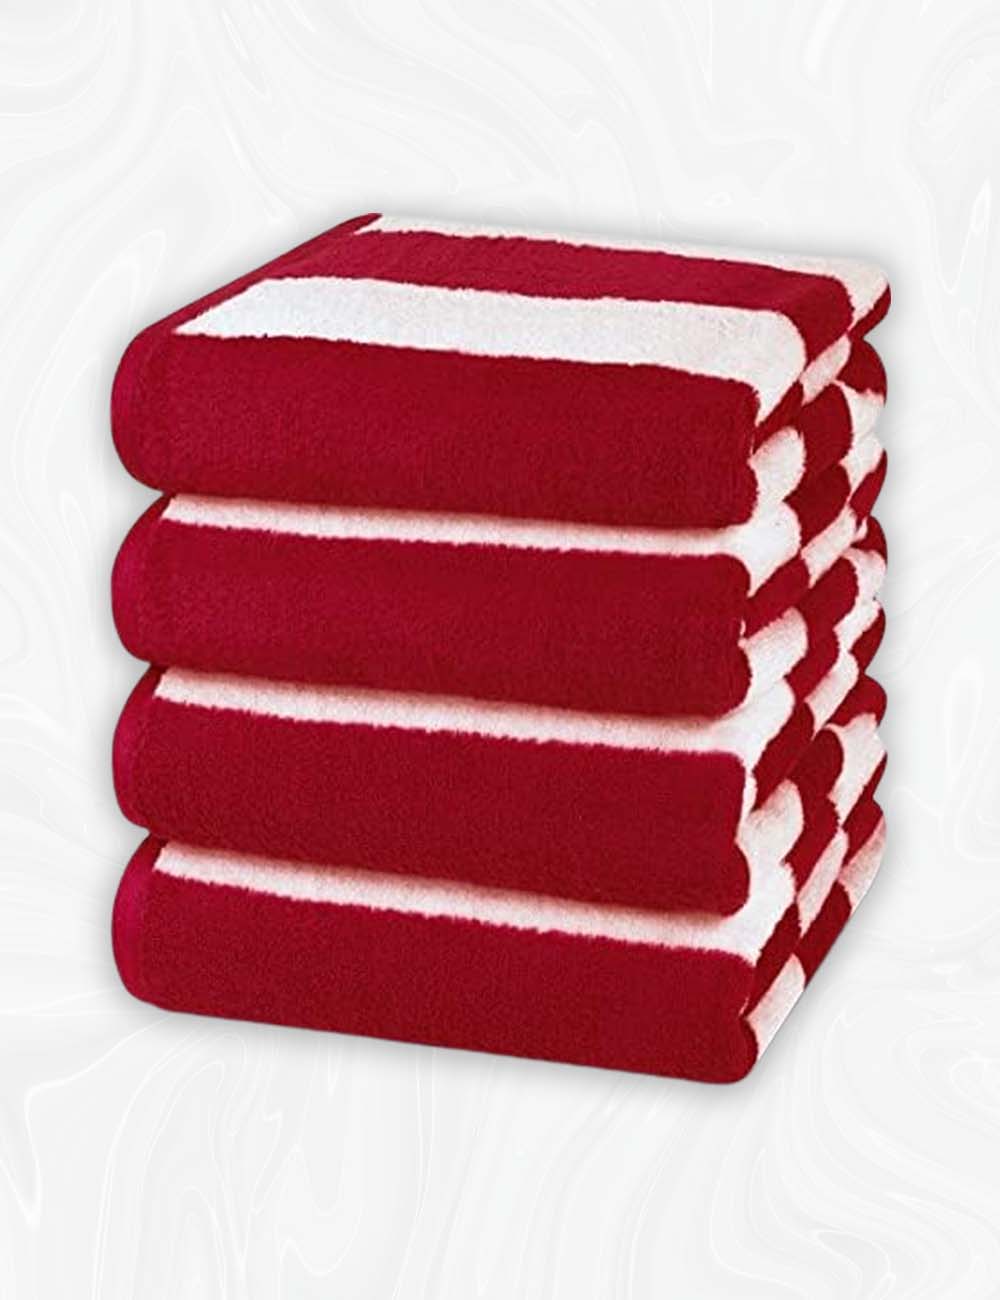 HomeLabels Luxury Premium Quality Cabana Beach Towels – Pack of 4 Cabana Stripe Pool Towels (30 x 60 Inches) Multi Purpose Towels with High Absorbency, Red